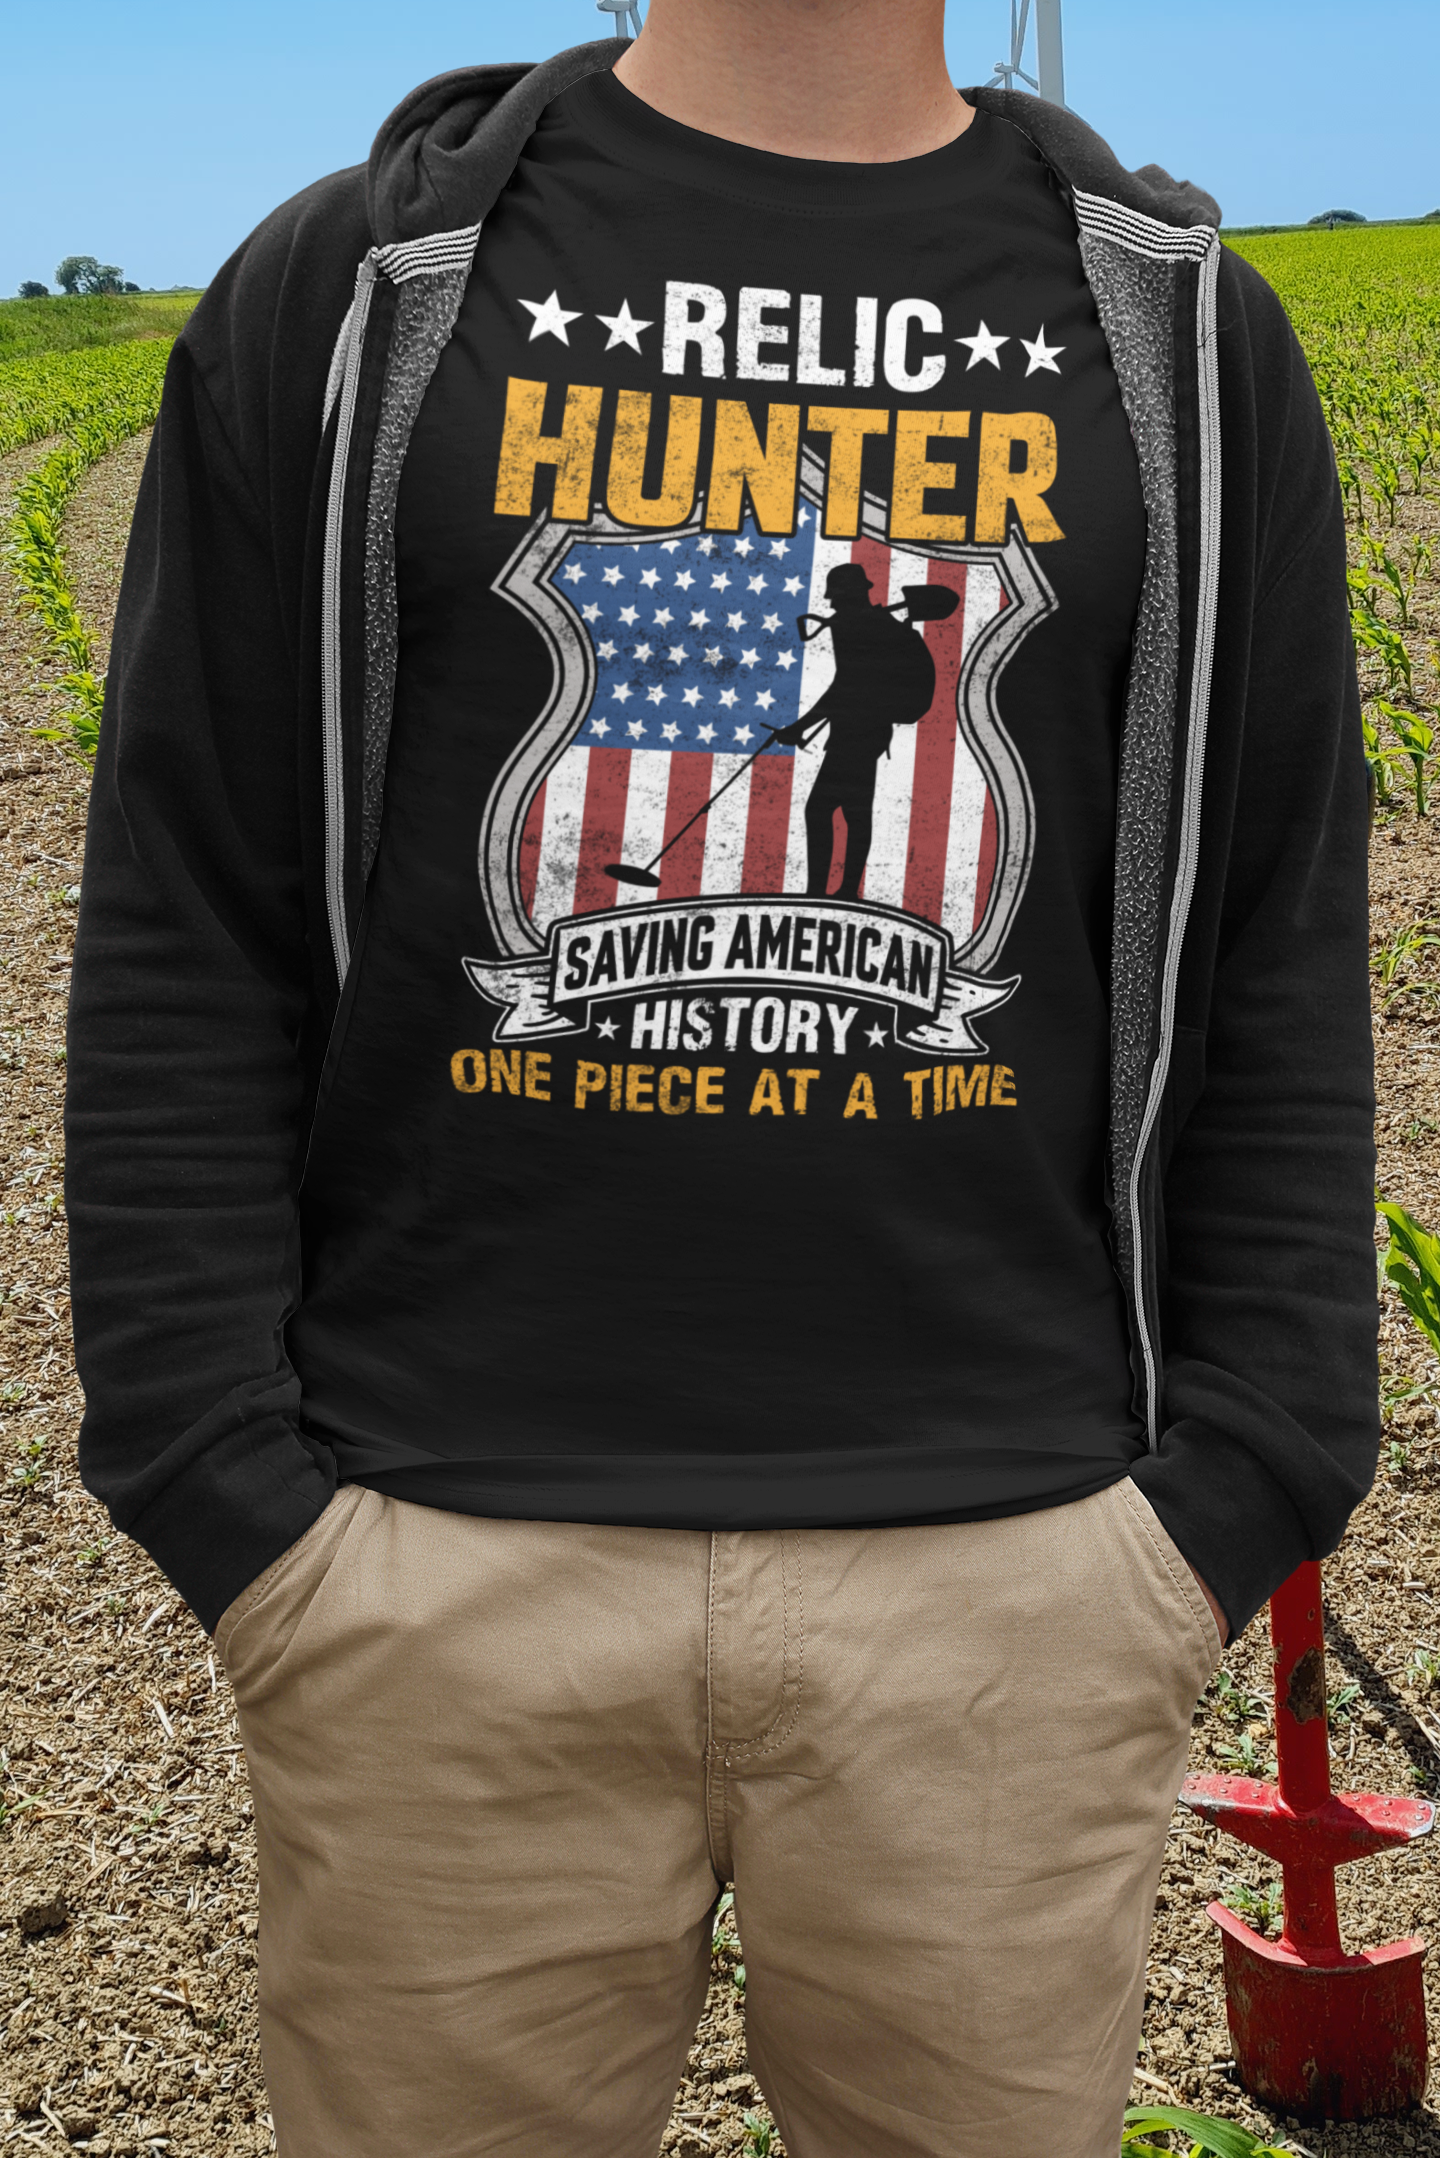 Relic hunter, saving american history one piece at a time.